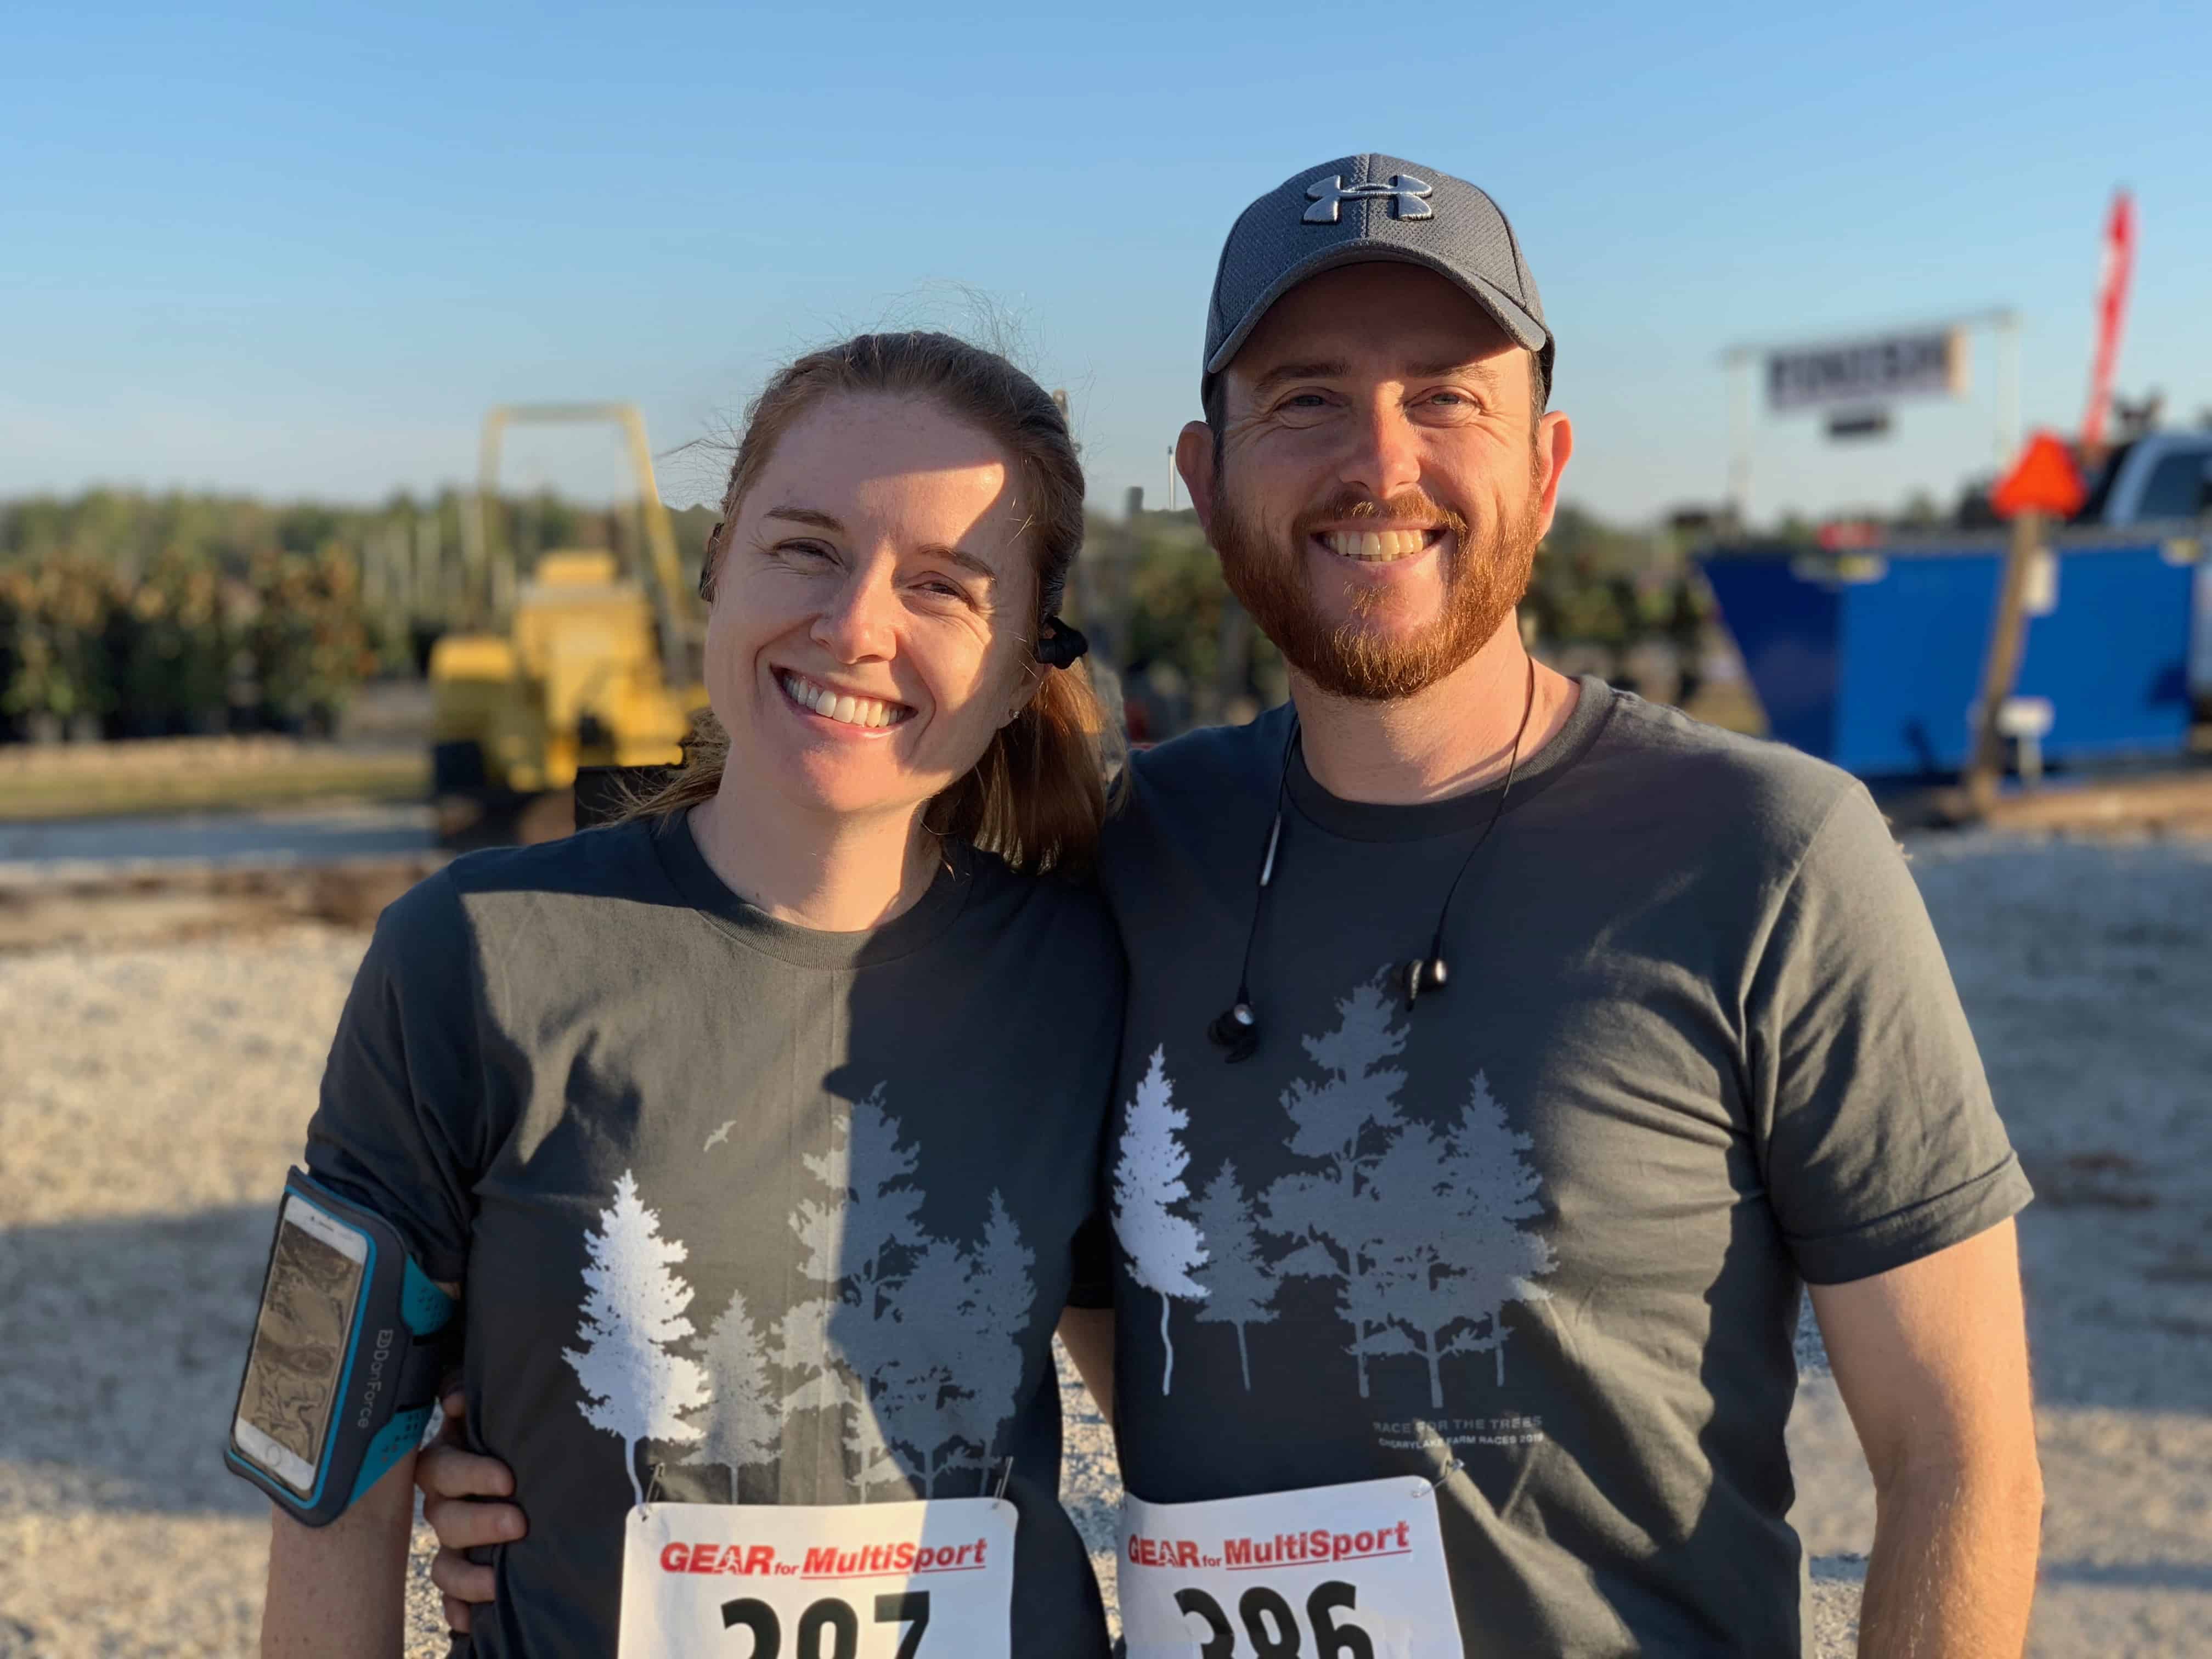 A couple in matching gray shirts smile together after a race.